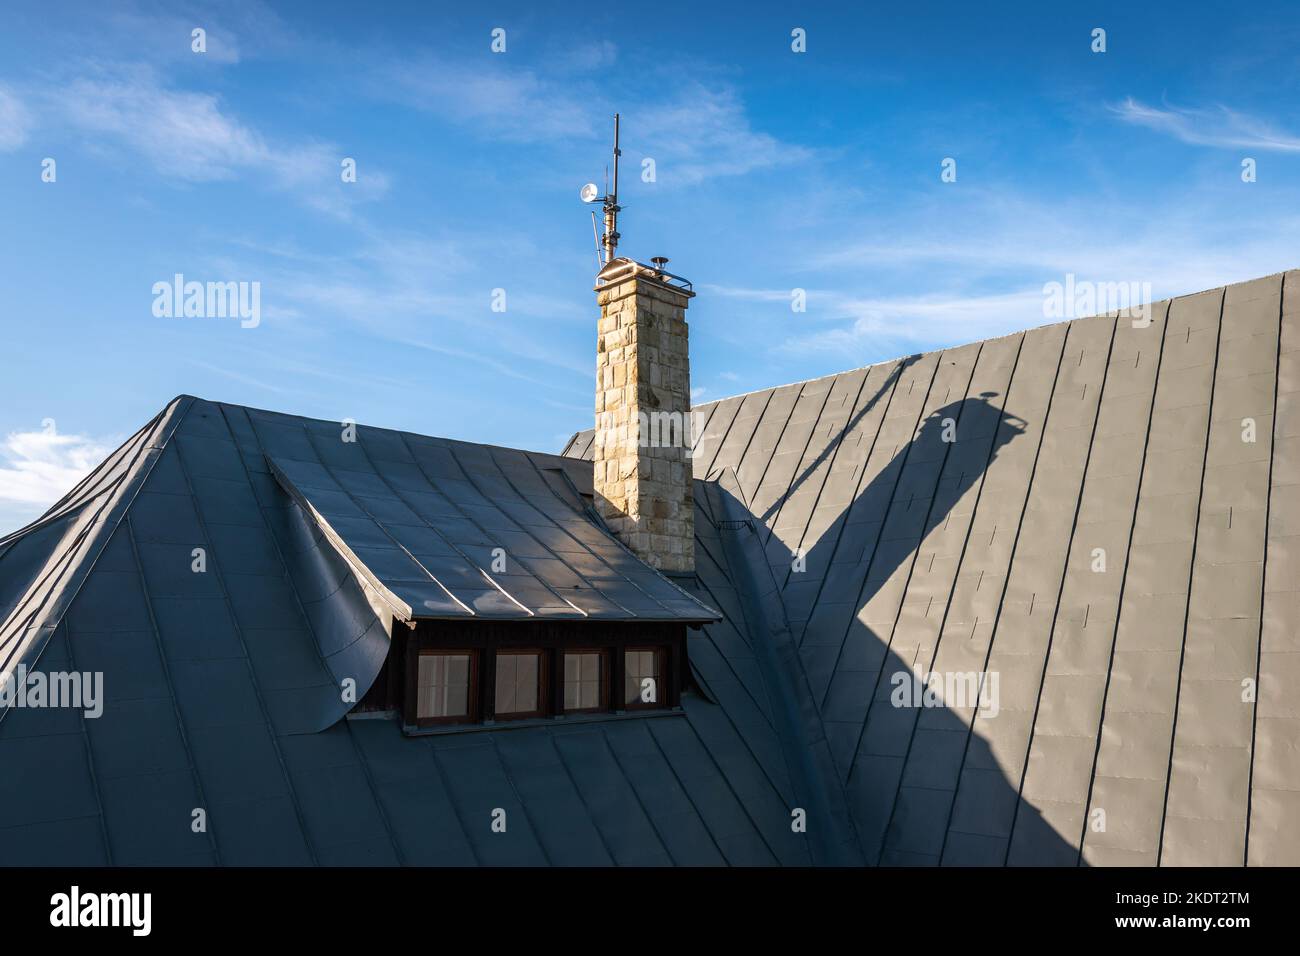 Hipped roof with roof window (dormer) and covered with grey metal seam sheet. Stone chimney with cap and little transmitter. Blue, cloudy sky in the b Stock Photo